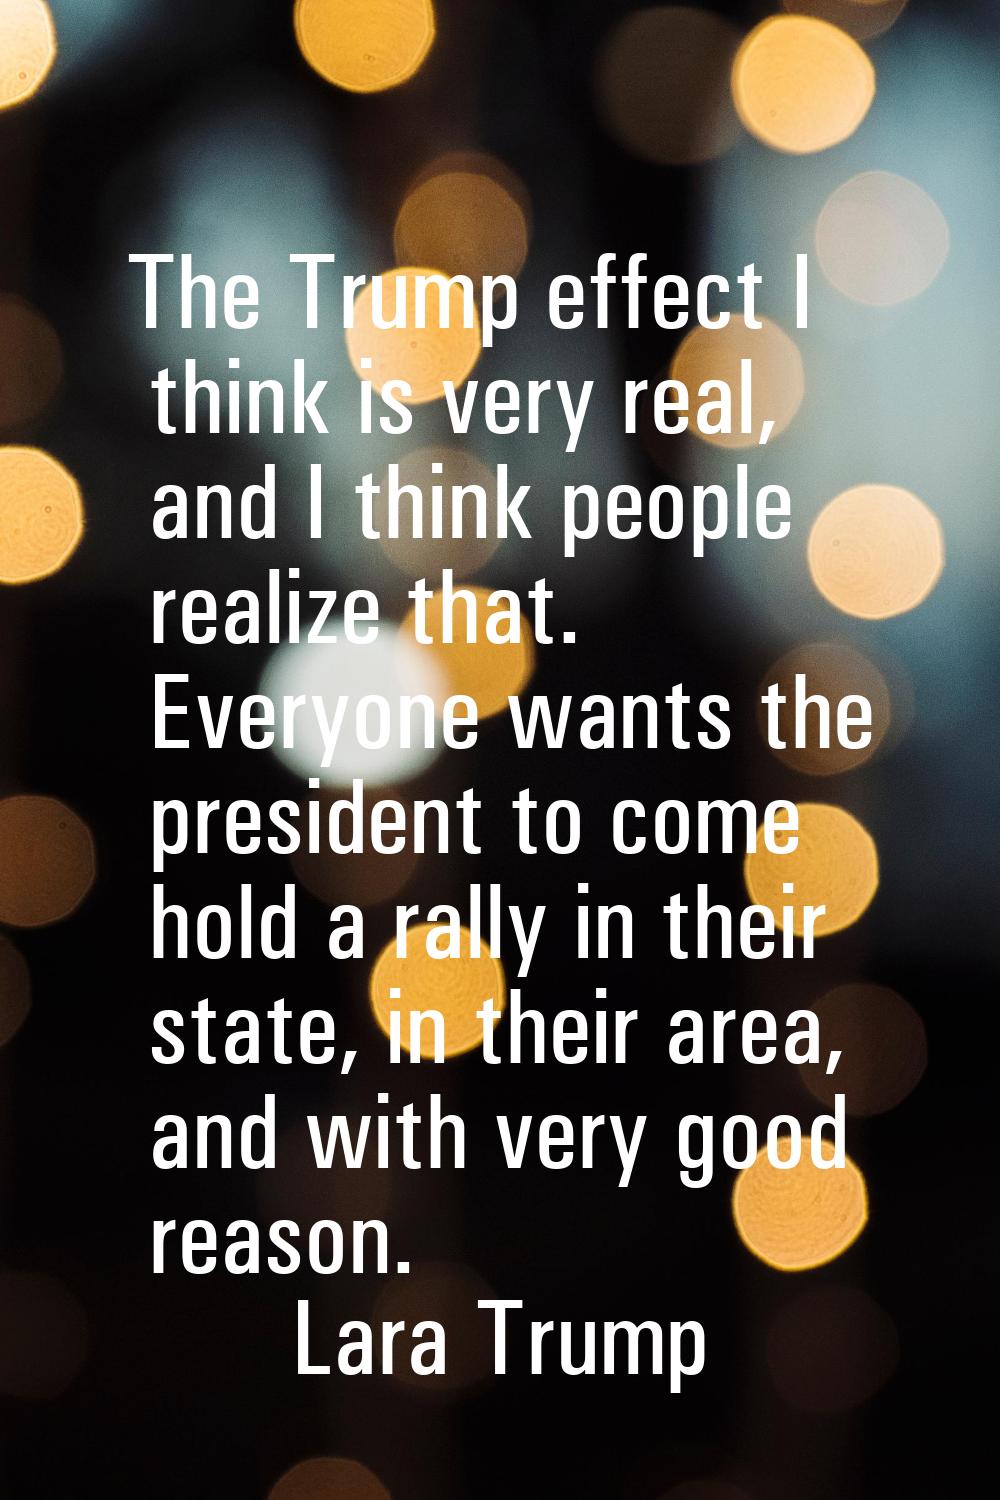 The Trump effect I think is very real, and I think people realize that. Everyone wants the presiden